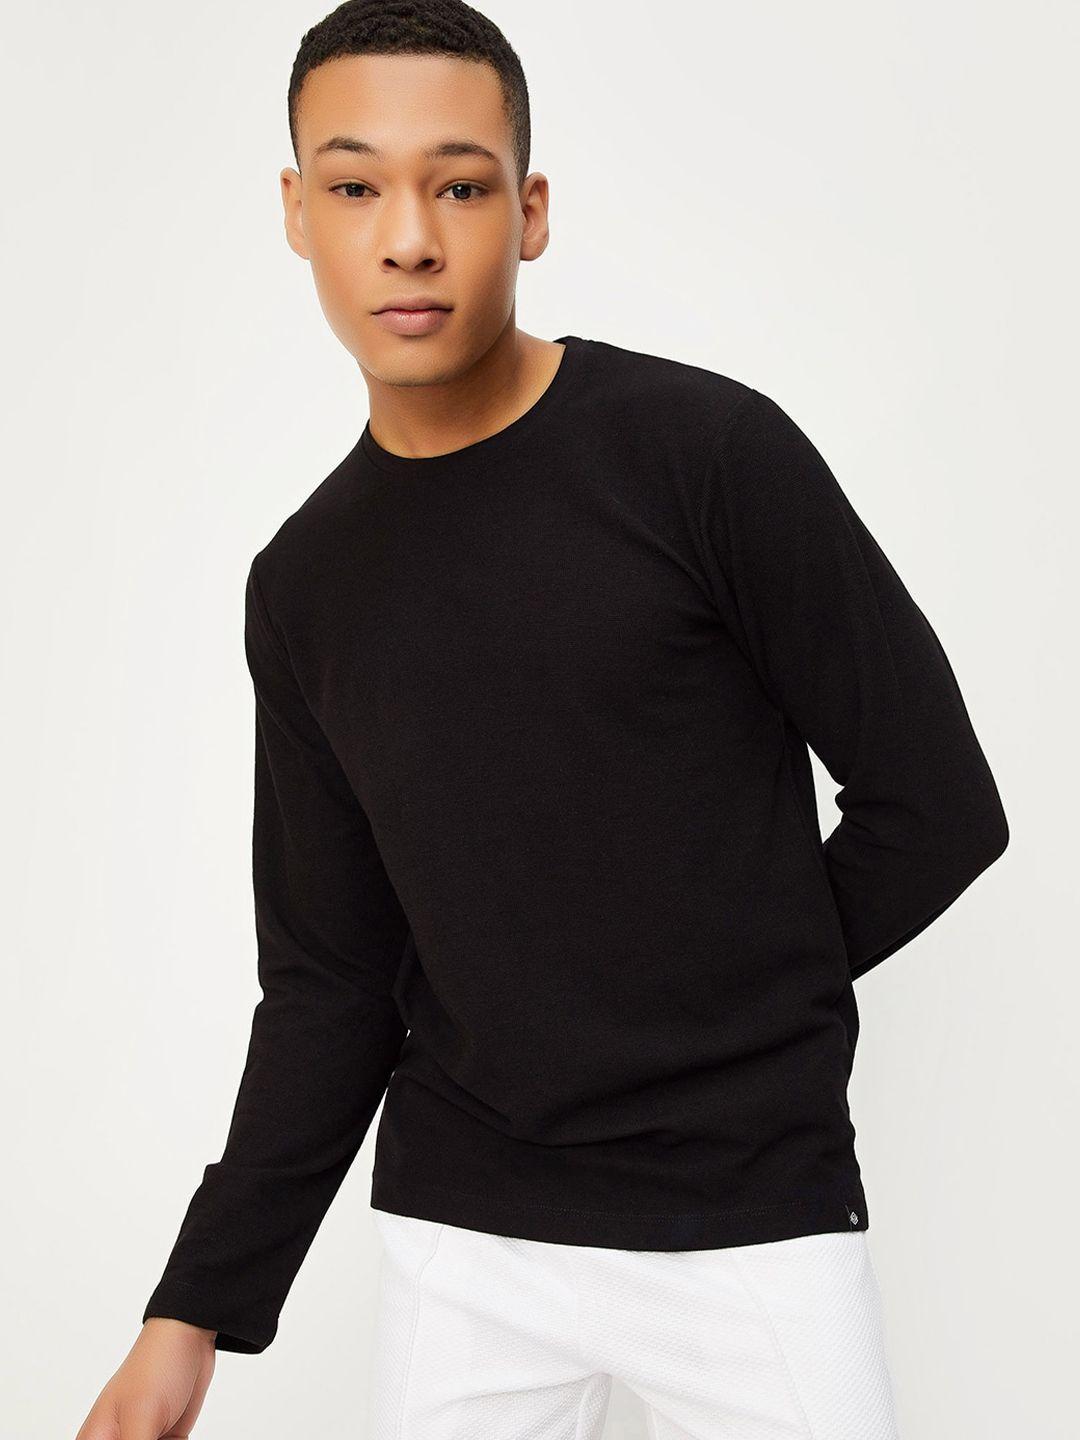 max round neck long sleeves casual t-shirt